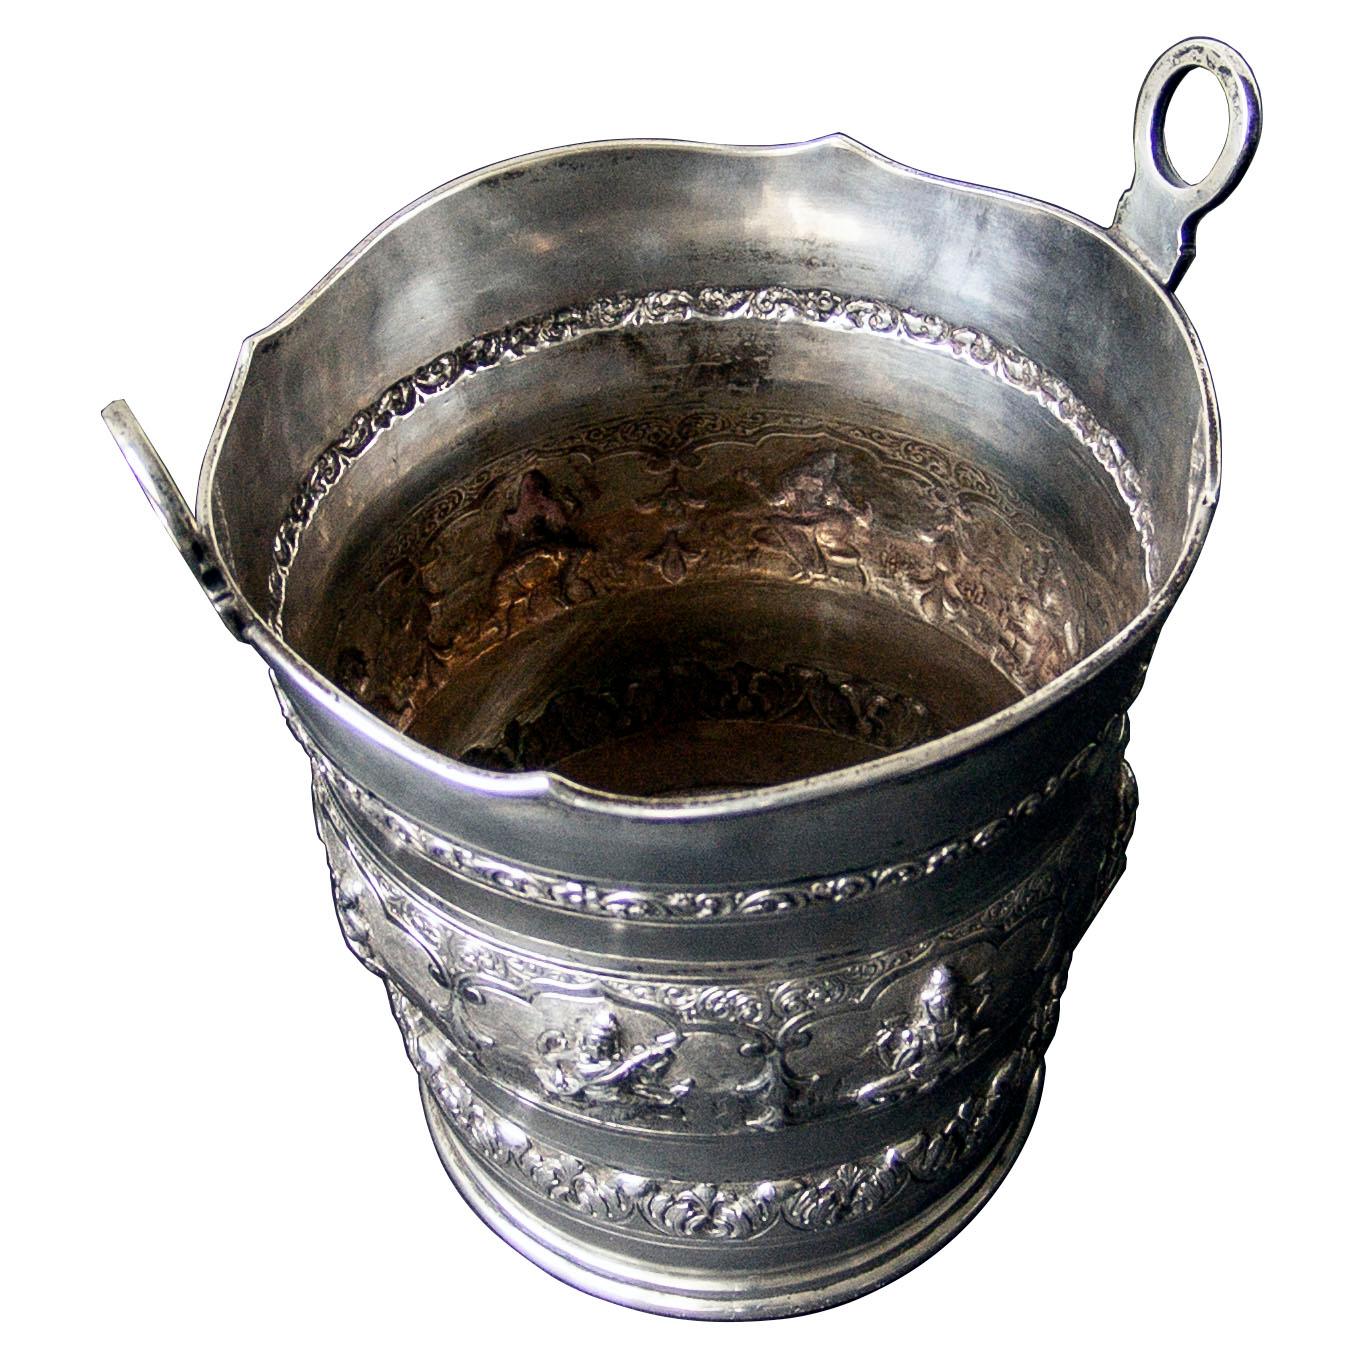 A superb quality Indian silver ice pail with circular base and flared design with shaped threaded rim supporting two ring handles. The body decorated with chased figural and floral design 